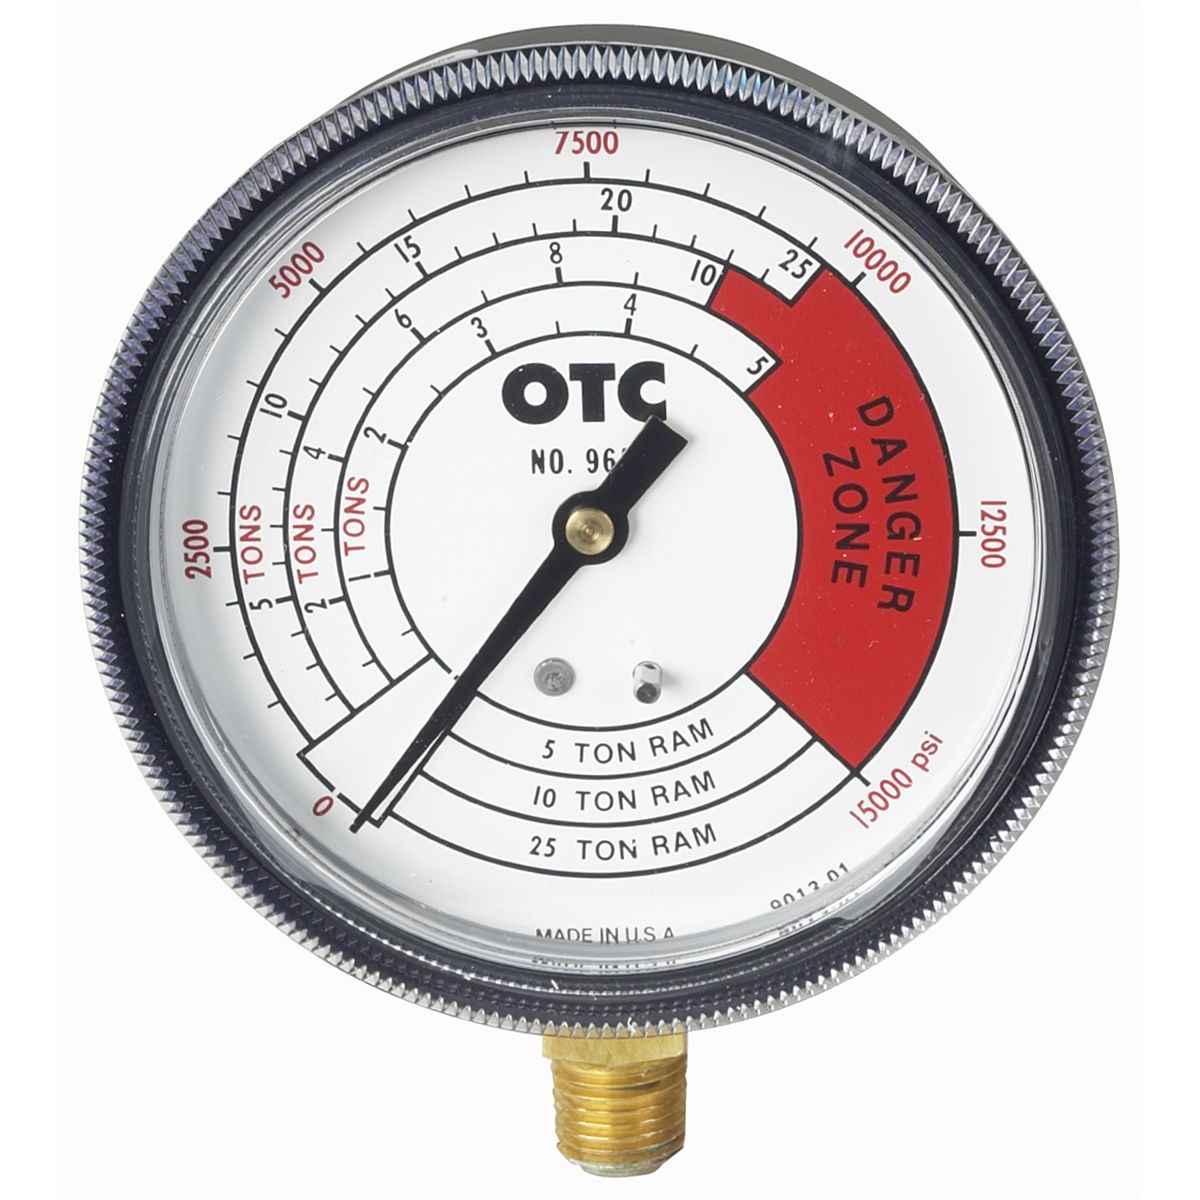 Pressure and Tonnage Gauge - Four Scales 0 to 25 Ton